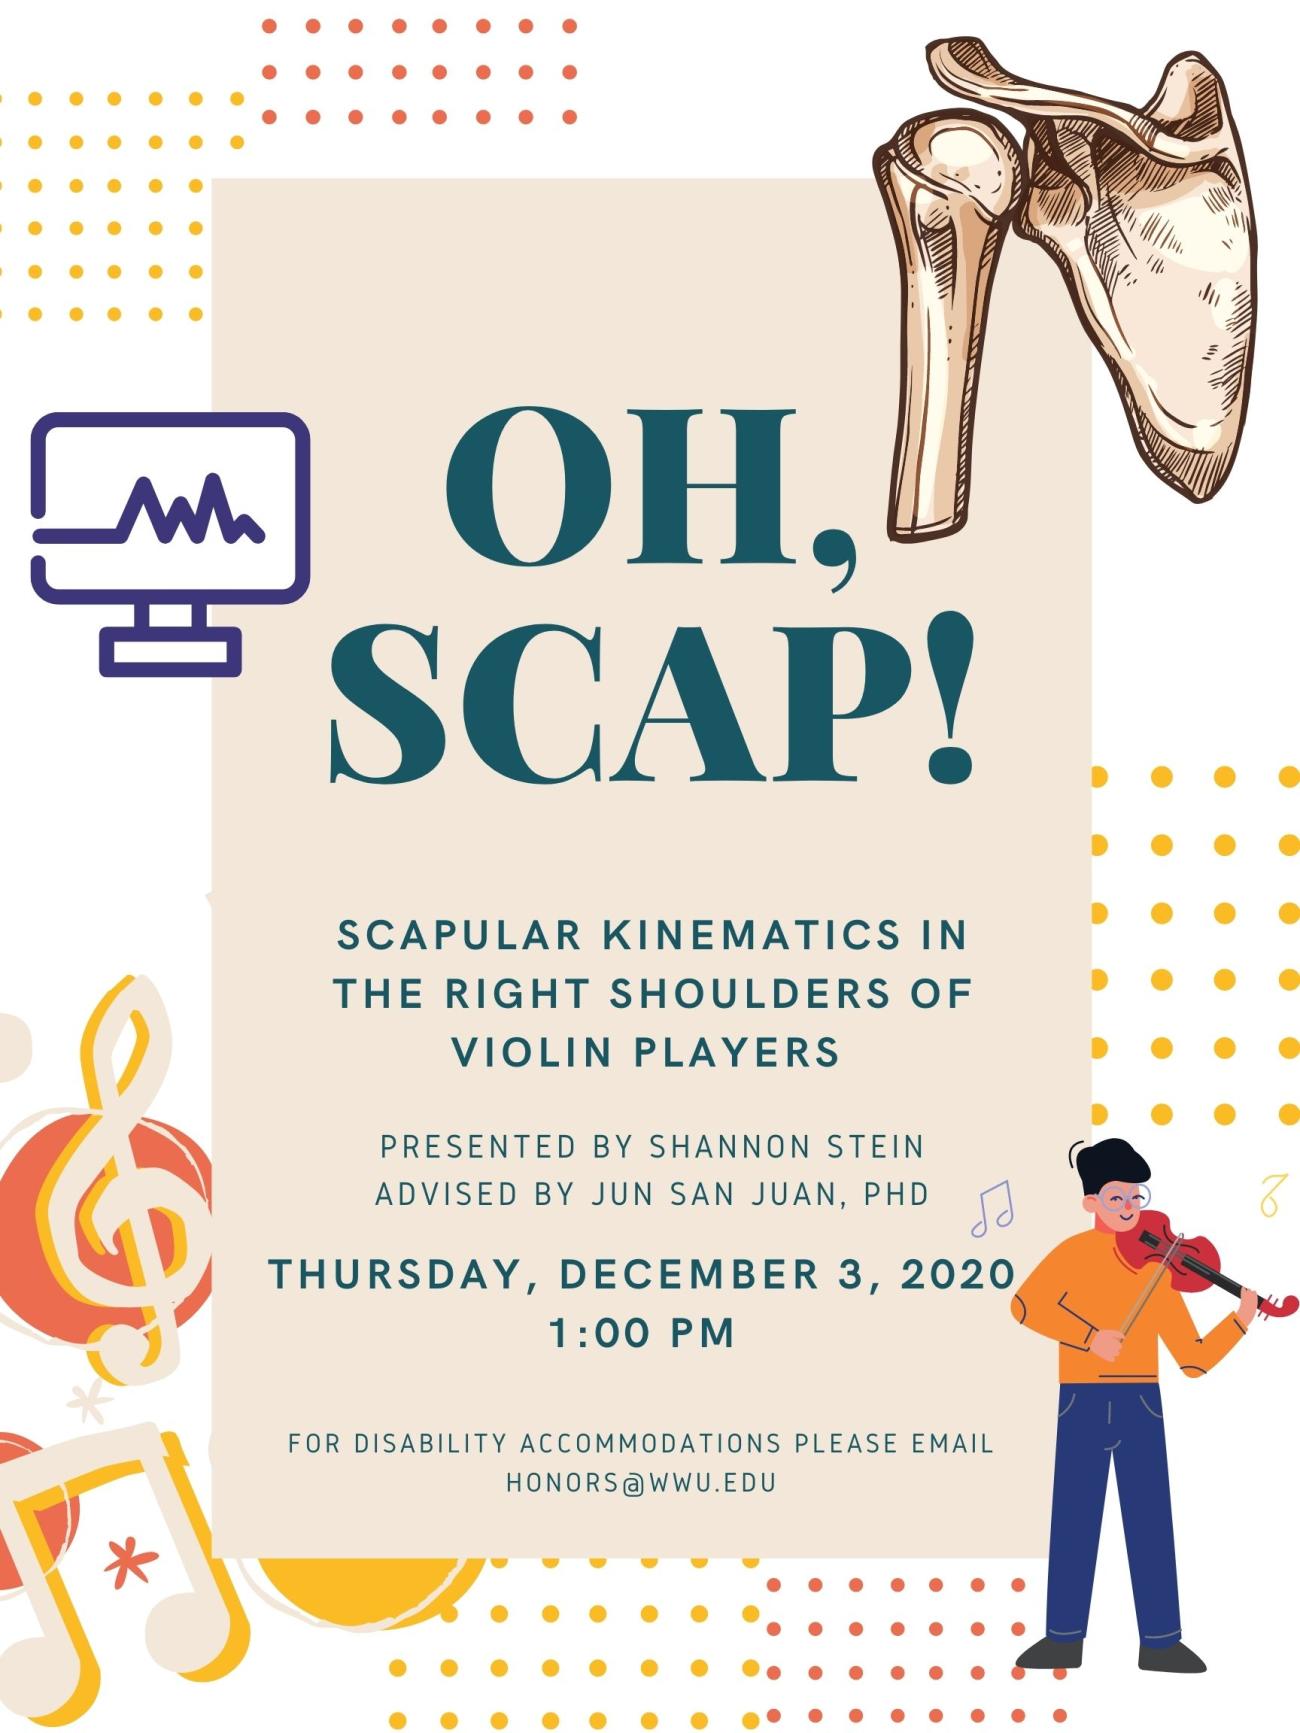 Image: In the upper right-hand corner is a scapula. A computer monitor is on the left. At the bottom on the left are musical symbols, and in the bottom right-hand corner a boy in an orange shirt plays violin.  Text: "Oh, Scap! Scapular Kinematics in the Right Shoulders of Violin Players. Presented by Shannon Stein. Advised by Jun San Juan, PhD. Thursday, December 3, 2020. 1:00 PM. For disability accommodations please email honors@wwu.edu."